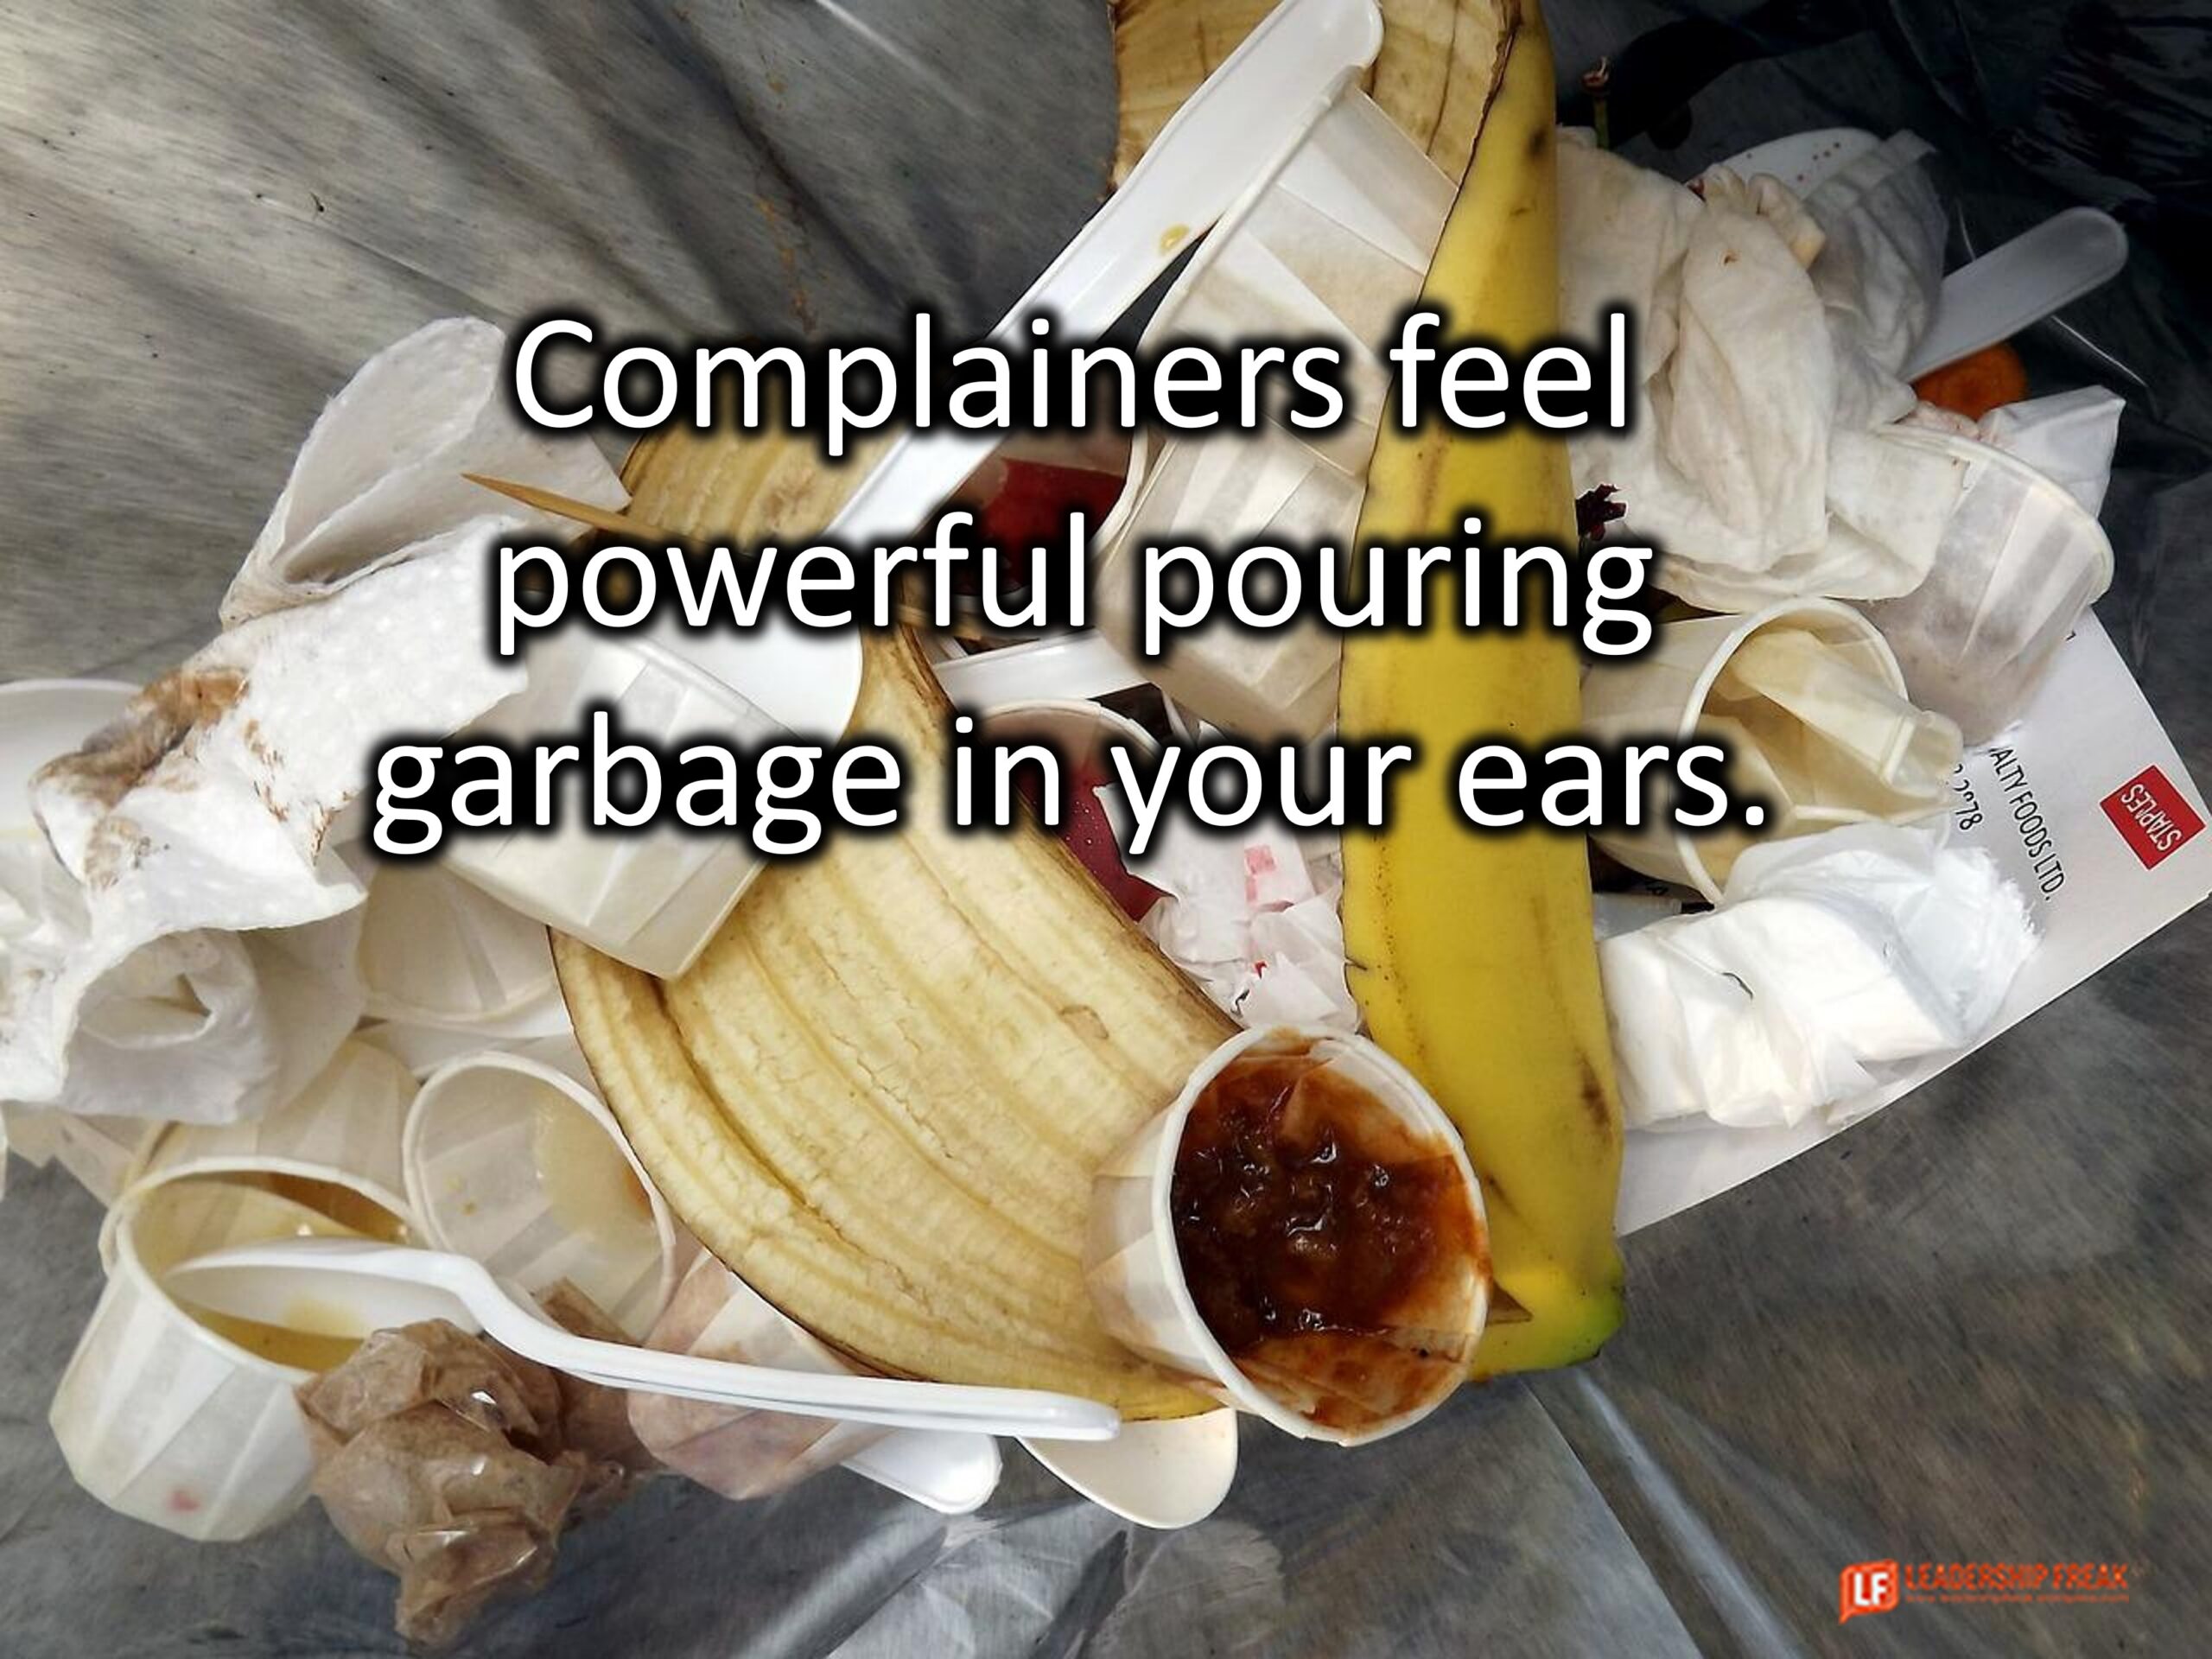 Complainers feel powerful pouring garbage in your ears